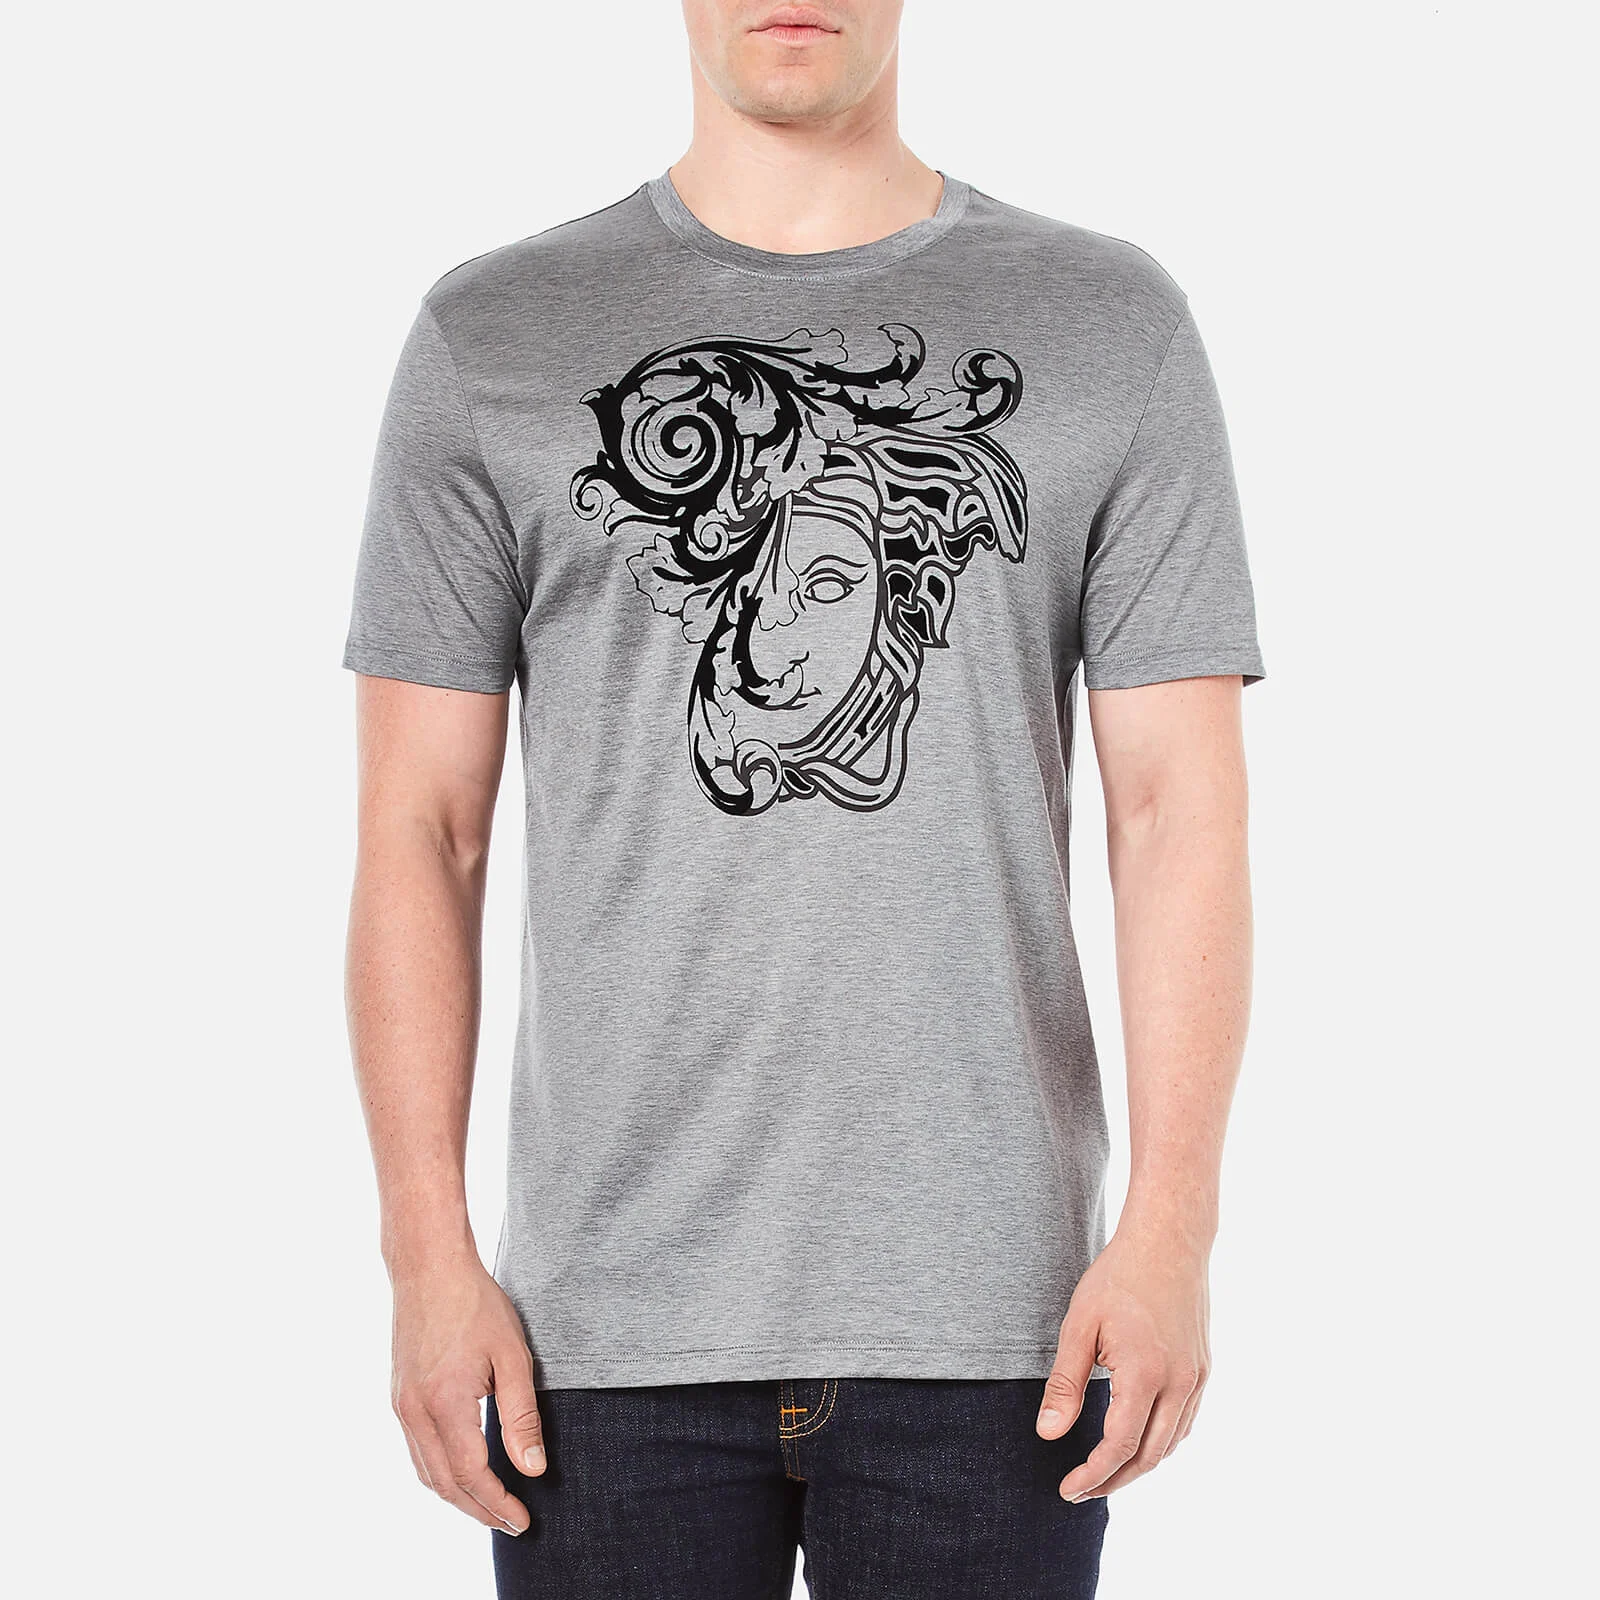 Versace Collection Men's Printed T-Shirt - Grey Image 1